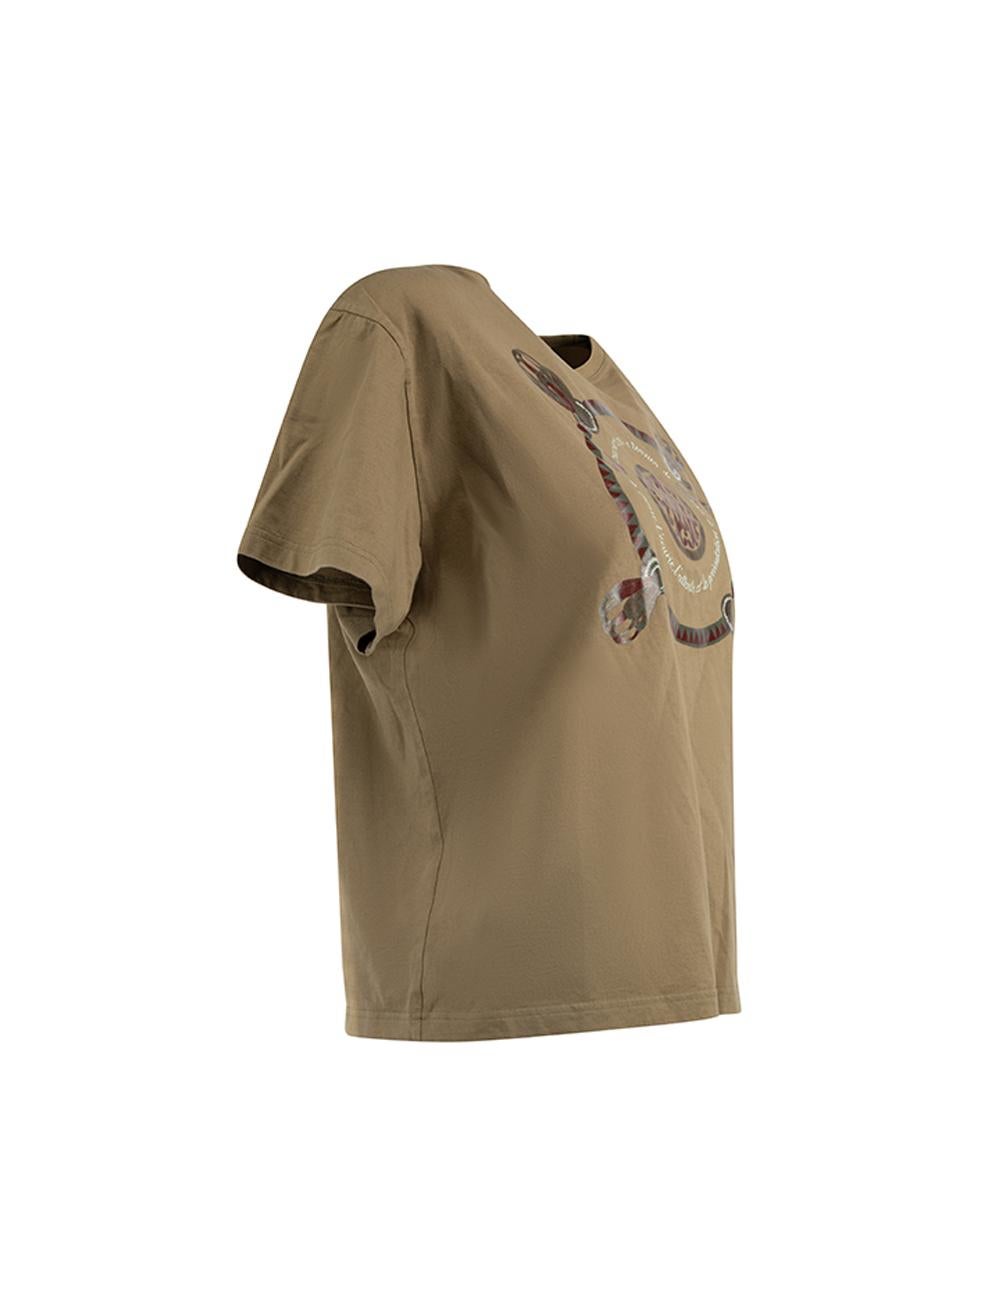 CONDITION is Never Worn. No visible wear to t-shirt is evident on this used Hermès designer resale item. Details Khaki Cotton T shirt Crew neckline Graphic print Made in France Composition 100% Cotton Care instructions: Professional wet cleaning